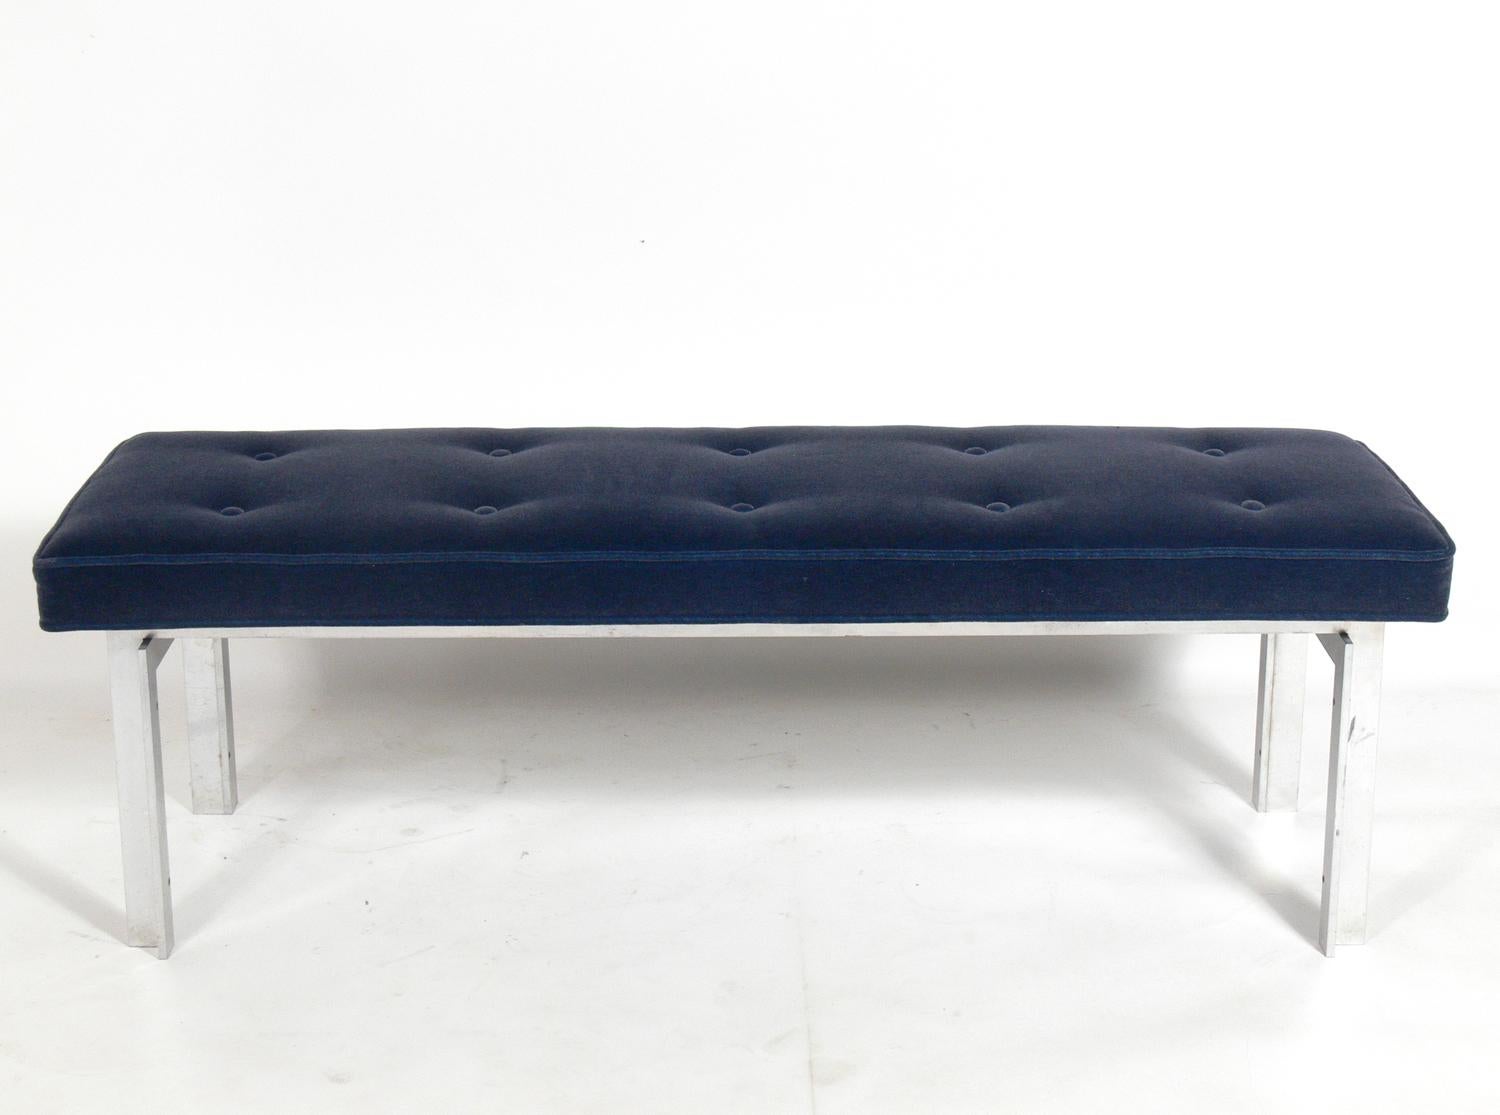 Clean lined aluminum bench designed by Paul Mayen for Habitat, England, circa 1970s. It has been reupholstered in a plush navy blue velvet.